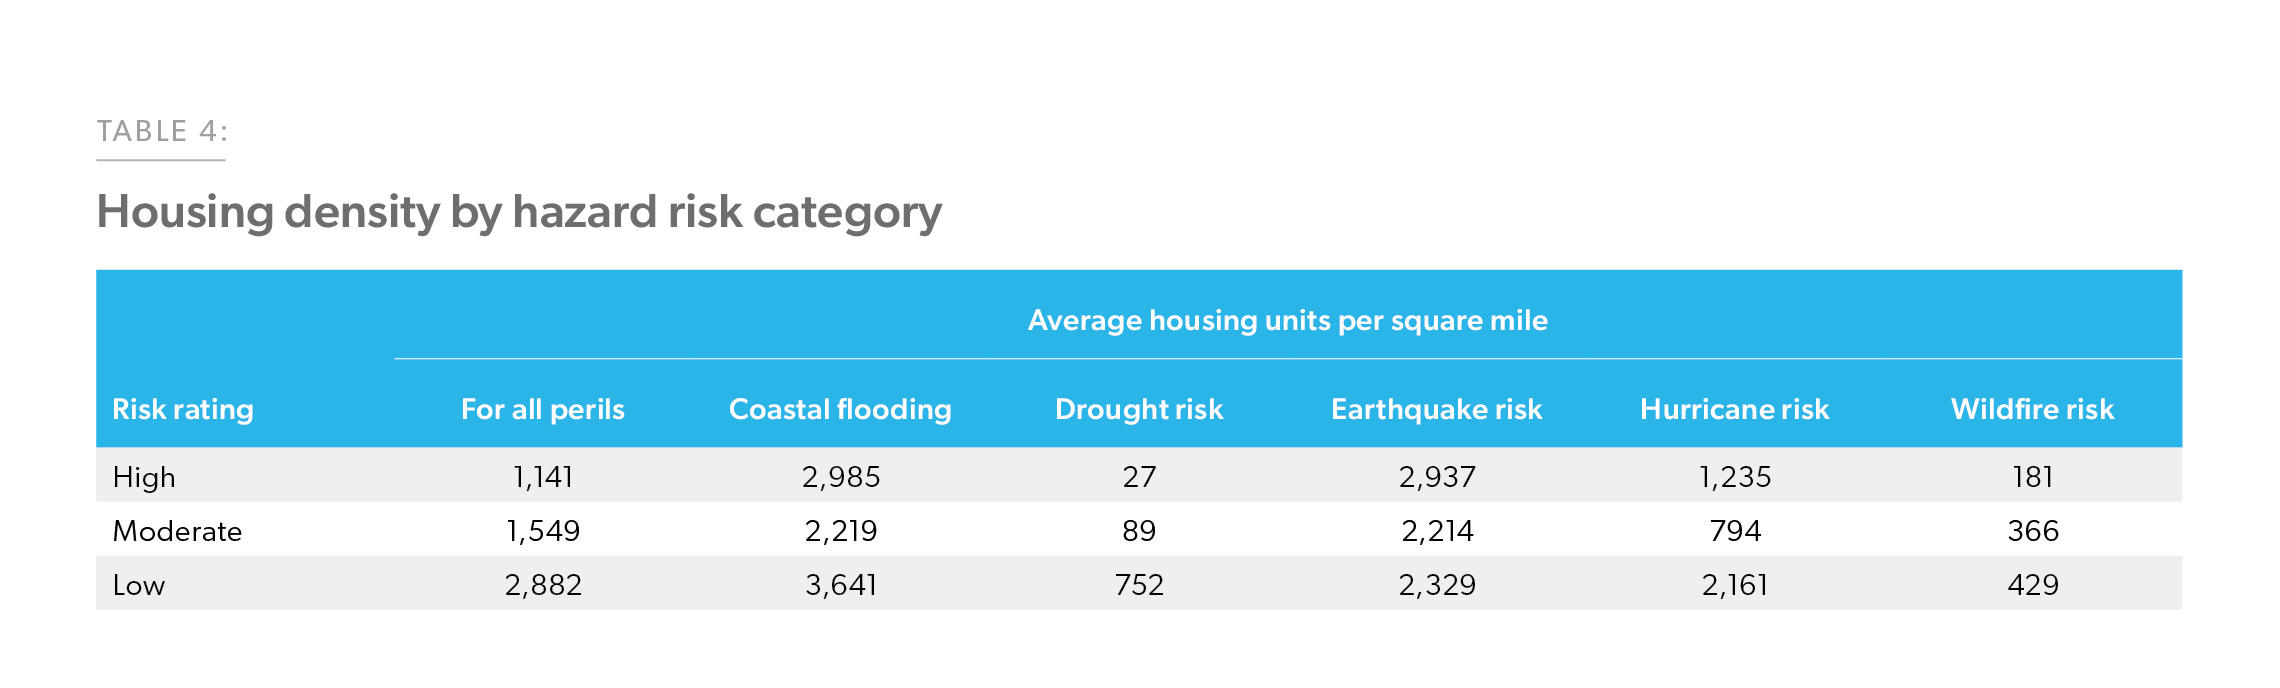 Table 4: Housing density by hazard risk category